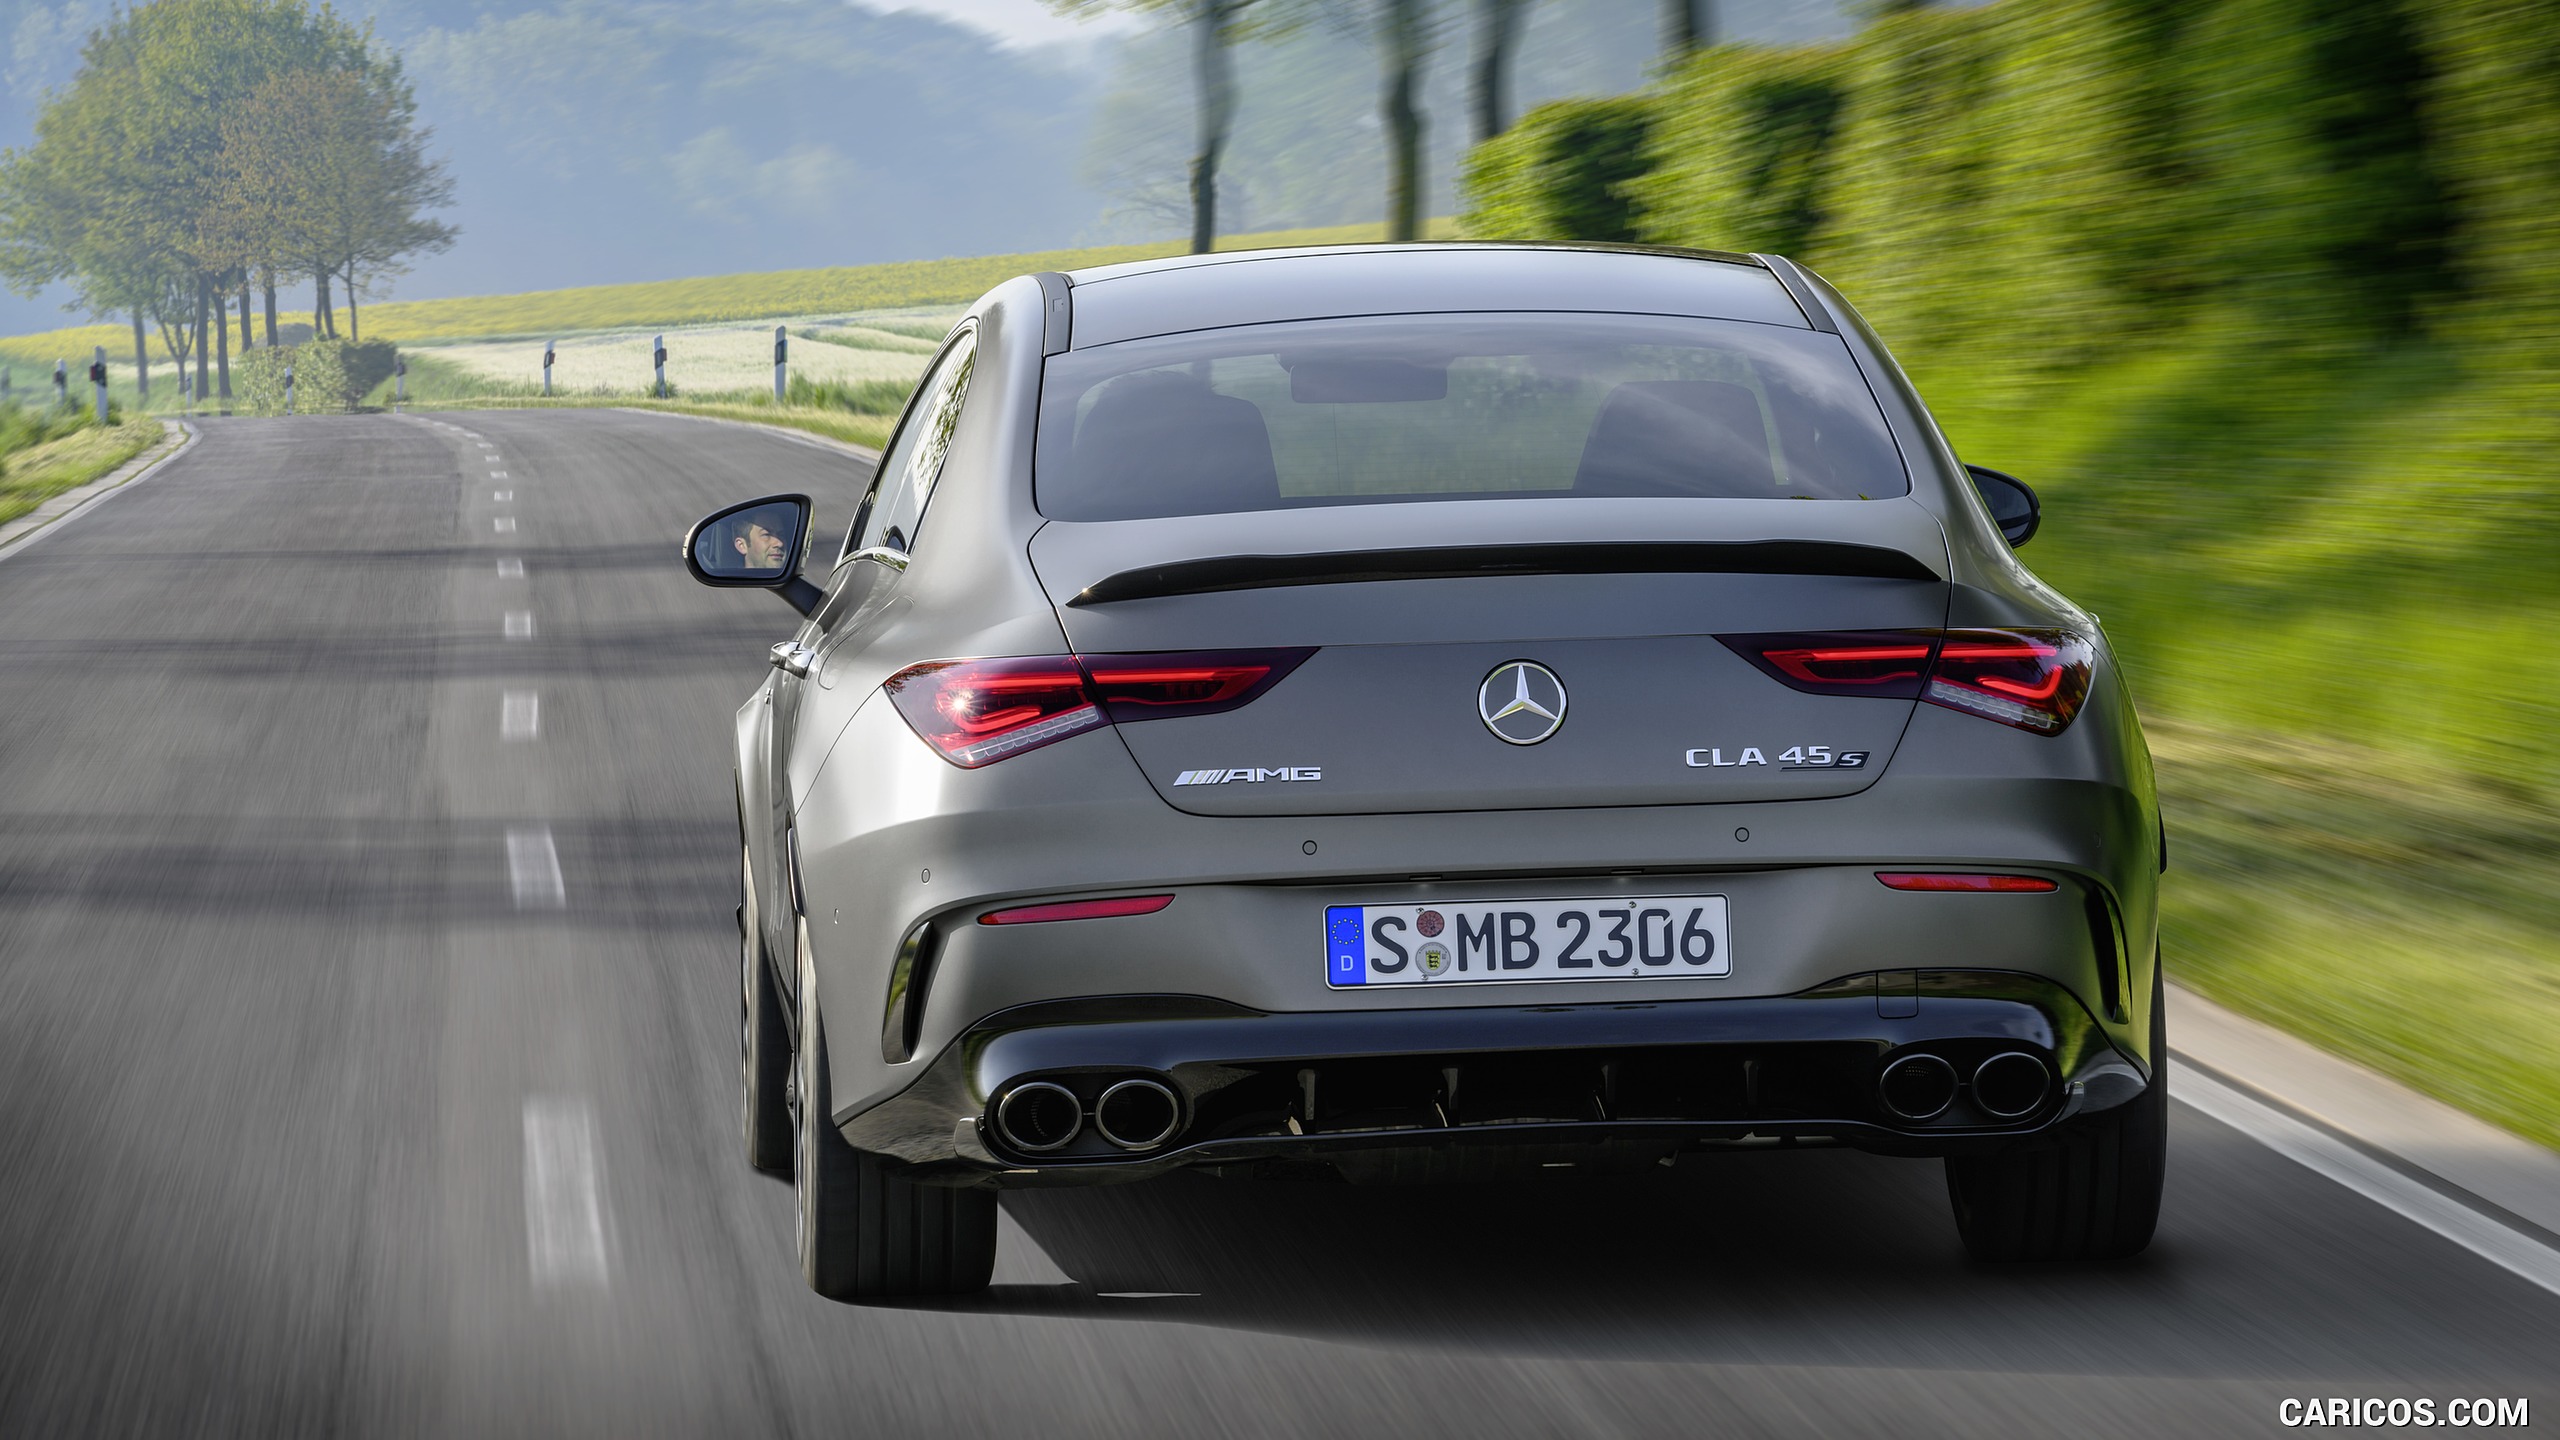 2020 Mercedes-AMG CLA 45 S 4MATIC+ - Rear, #7 of 159